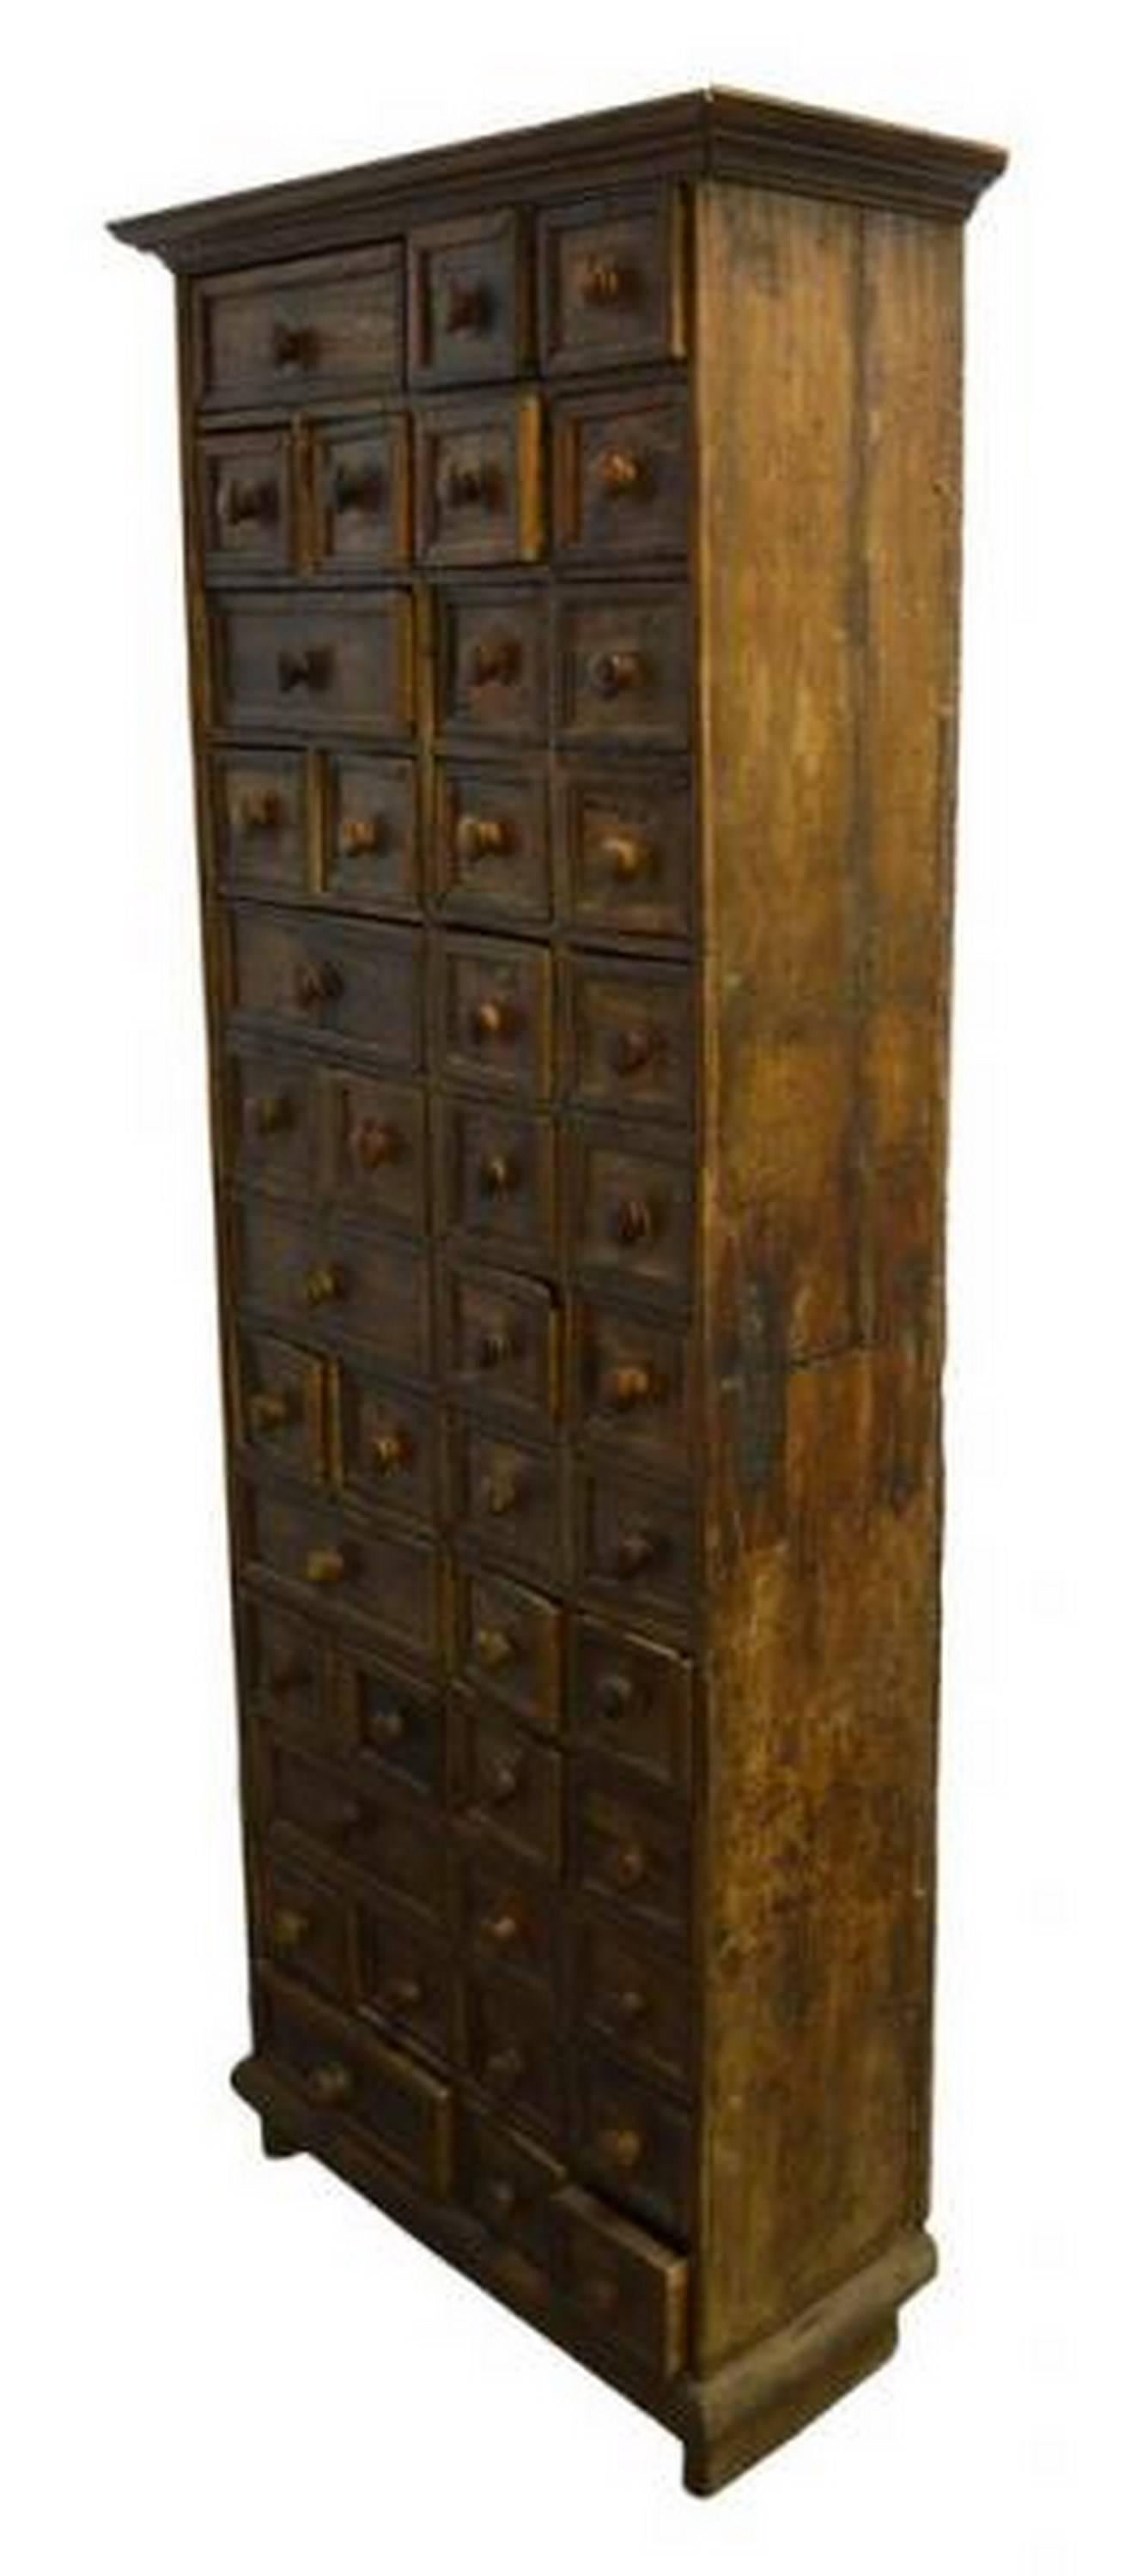 A stained wooden apothecary cabinet from 19th century Indonesia.  This hand carved apothecary cabinet comes with 45 drawers, 38 of them being square in size and 7 being double sized (as in side by side).  The drawers open thanks to simple round